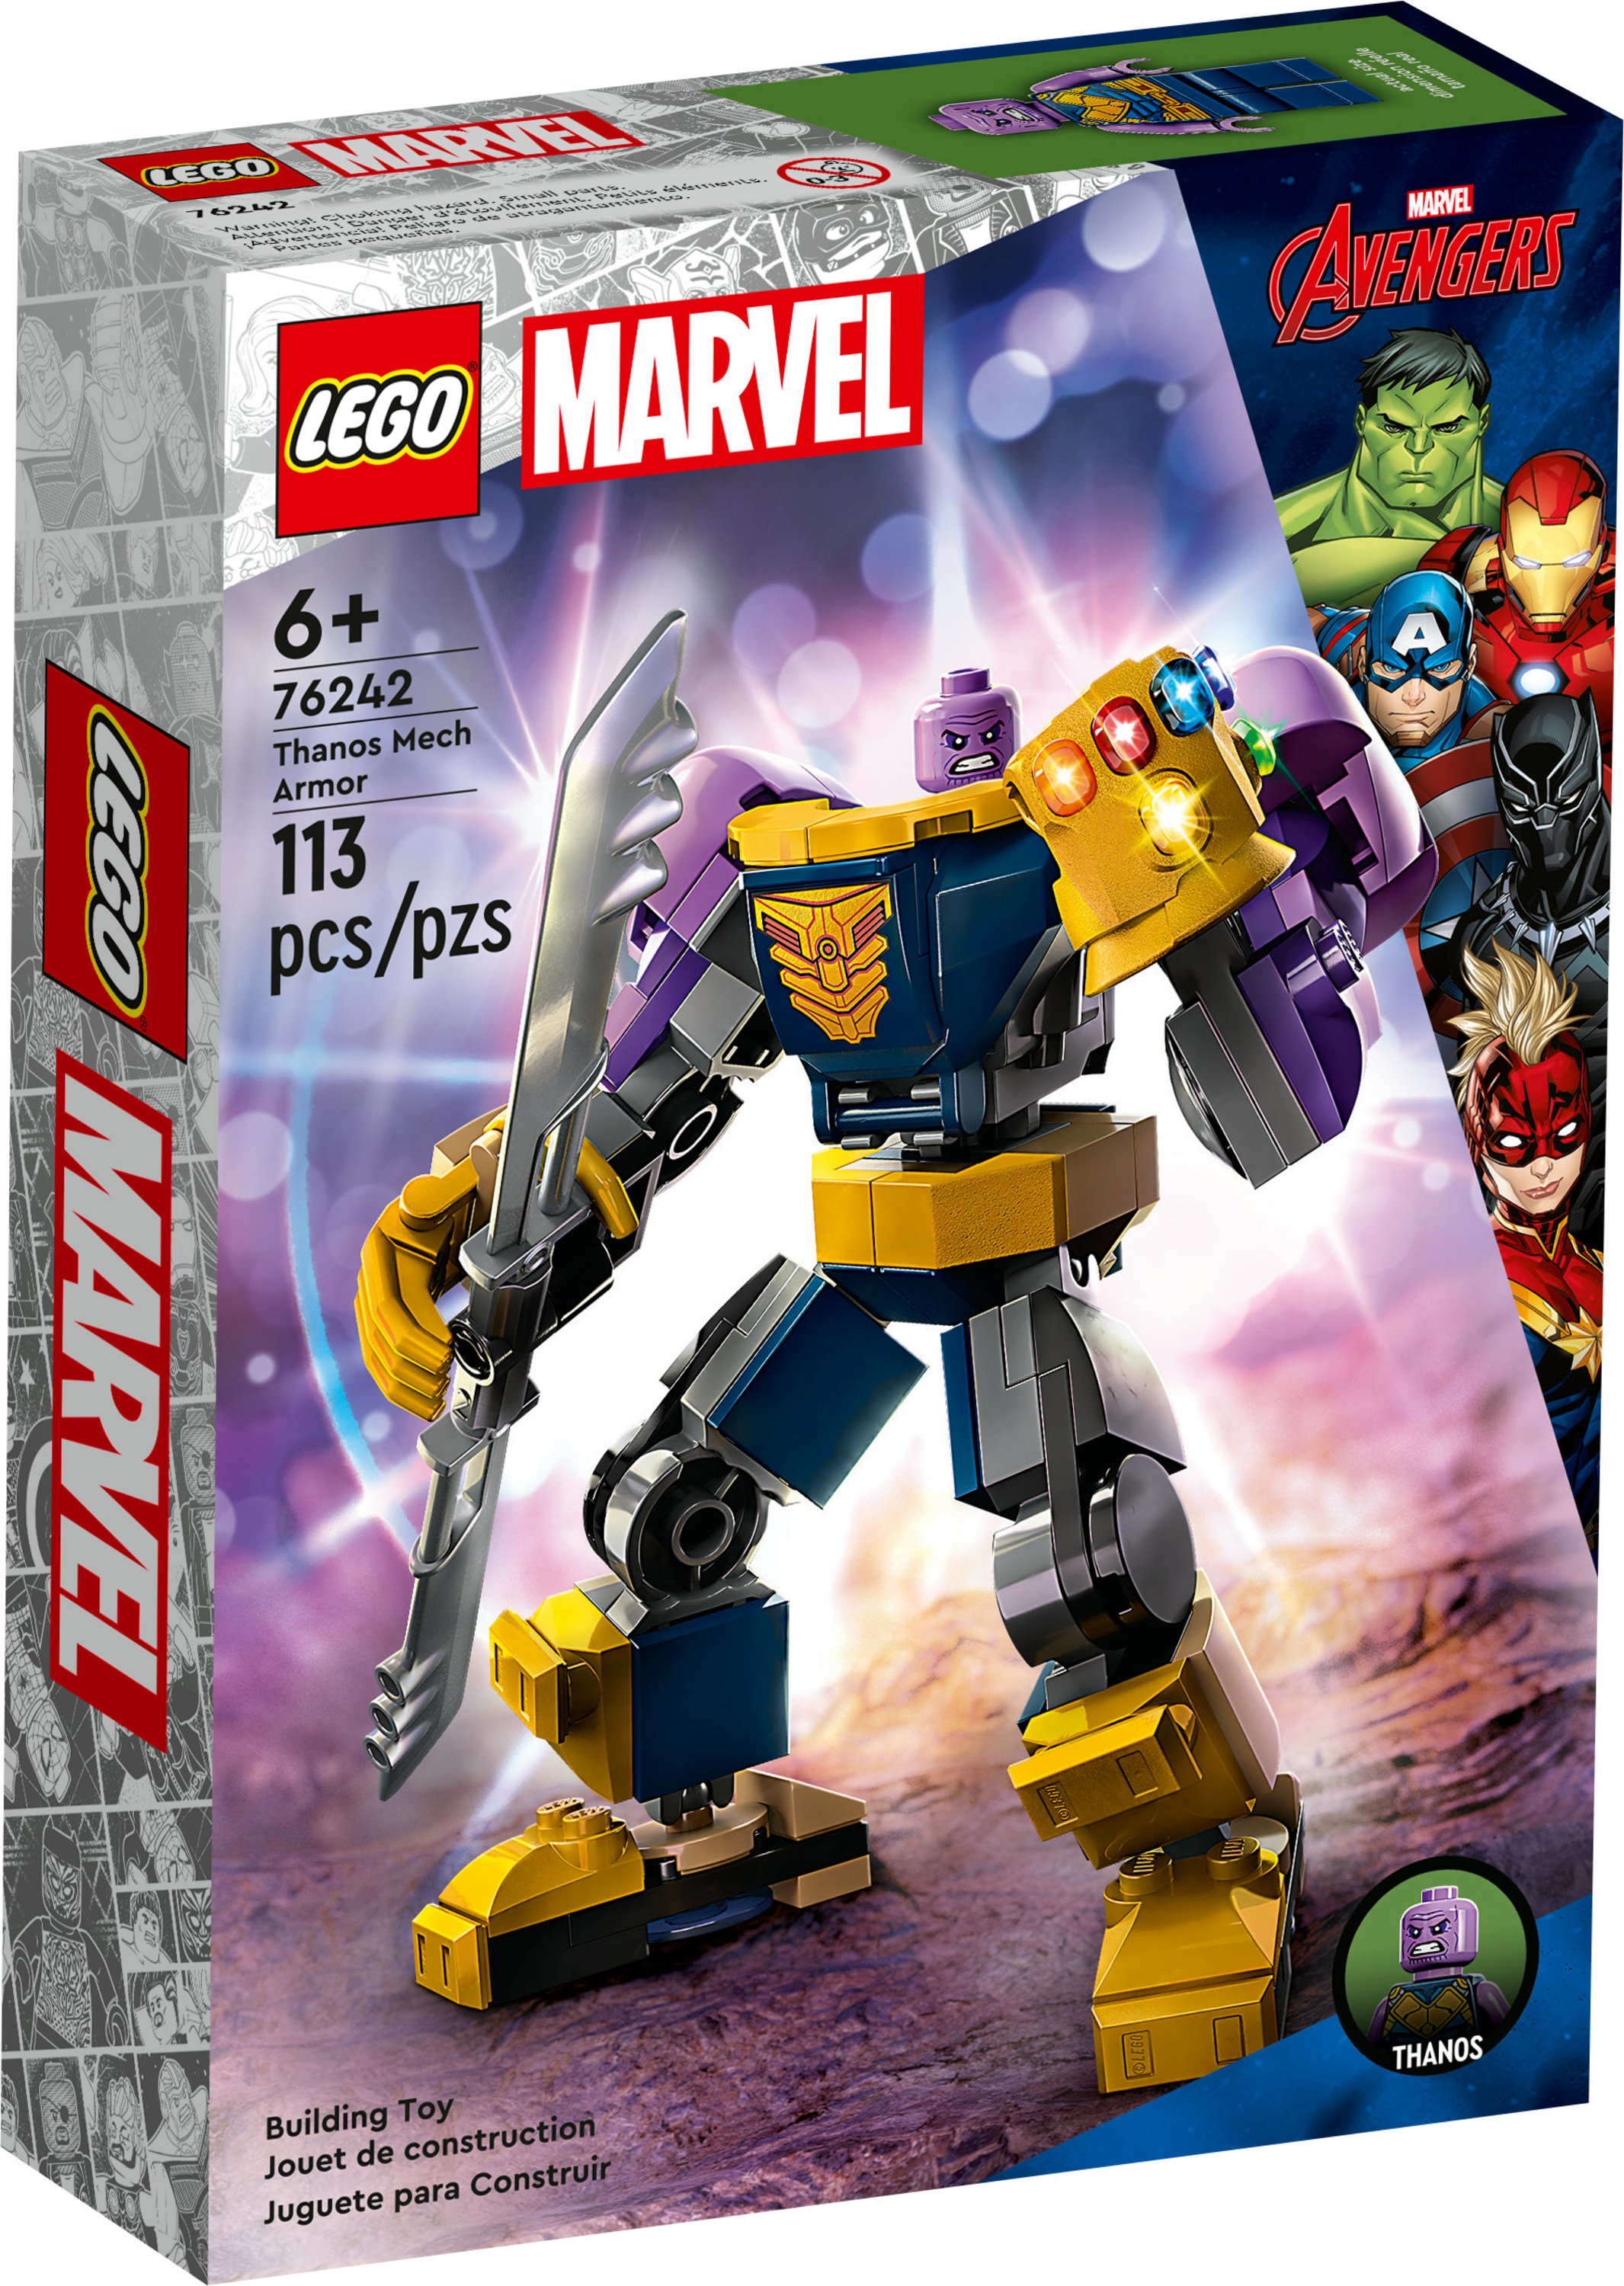 LEGO Marvel Thanos Mech Armor 76242, Avengers Action Figure Set, Building Toy with Infinity Gauntlet & Stones, Collectible Super Heroes Gift for Boys and Girls Ages 6+ - image 3 of 8